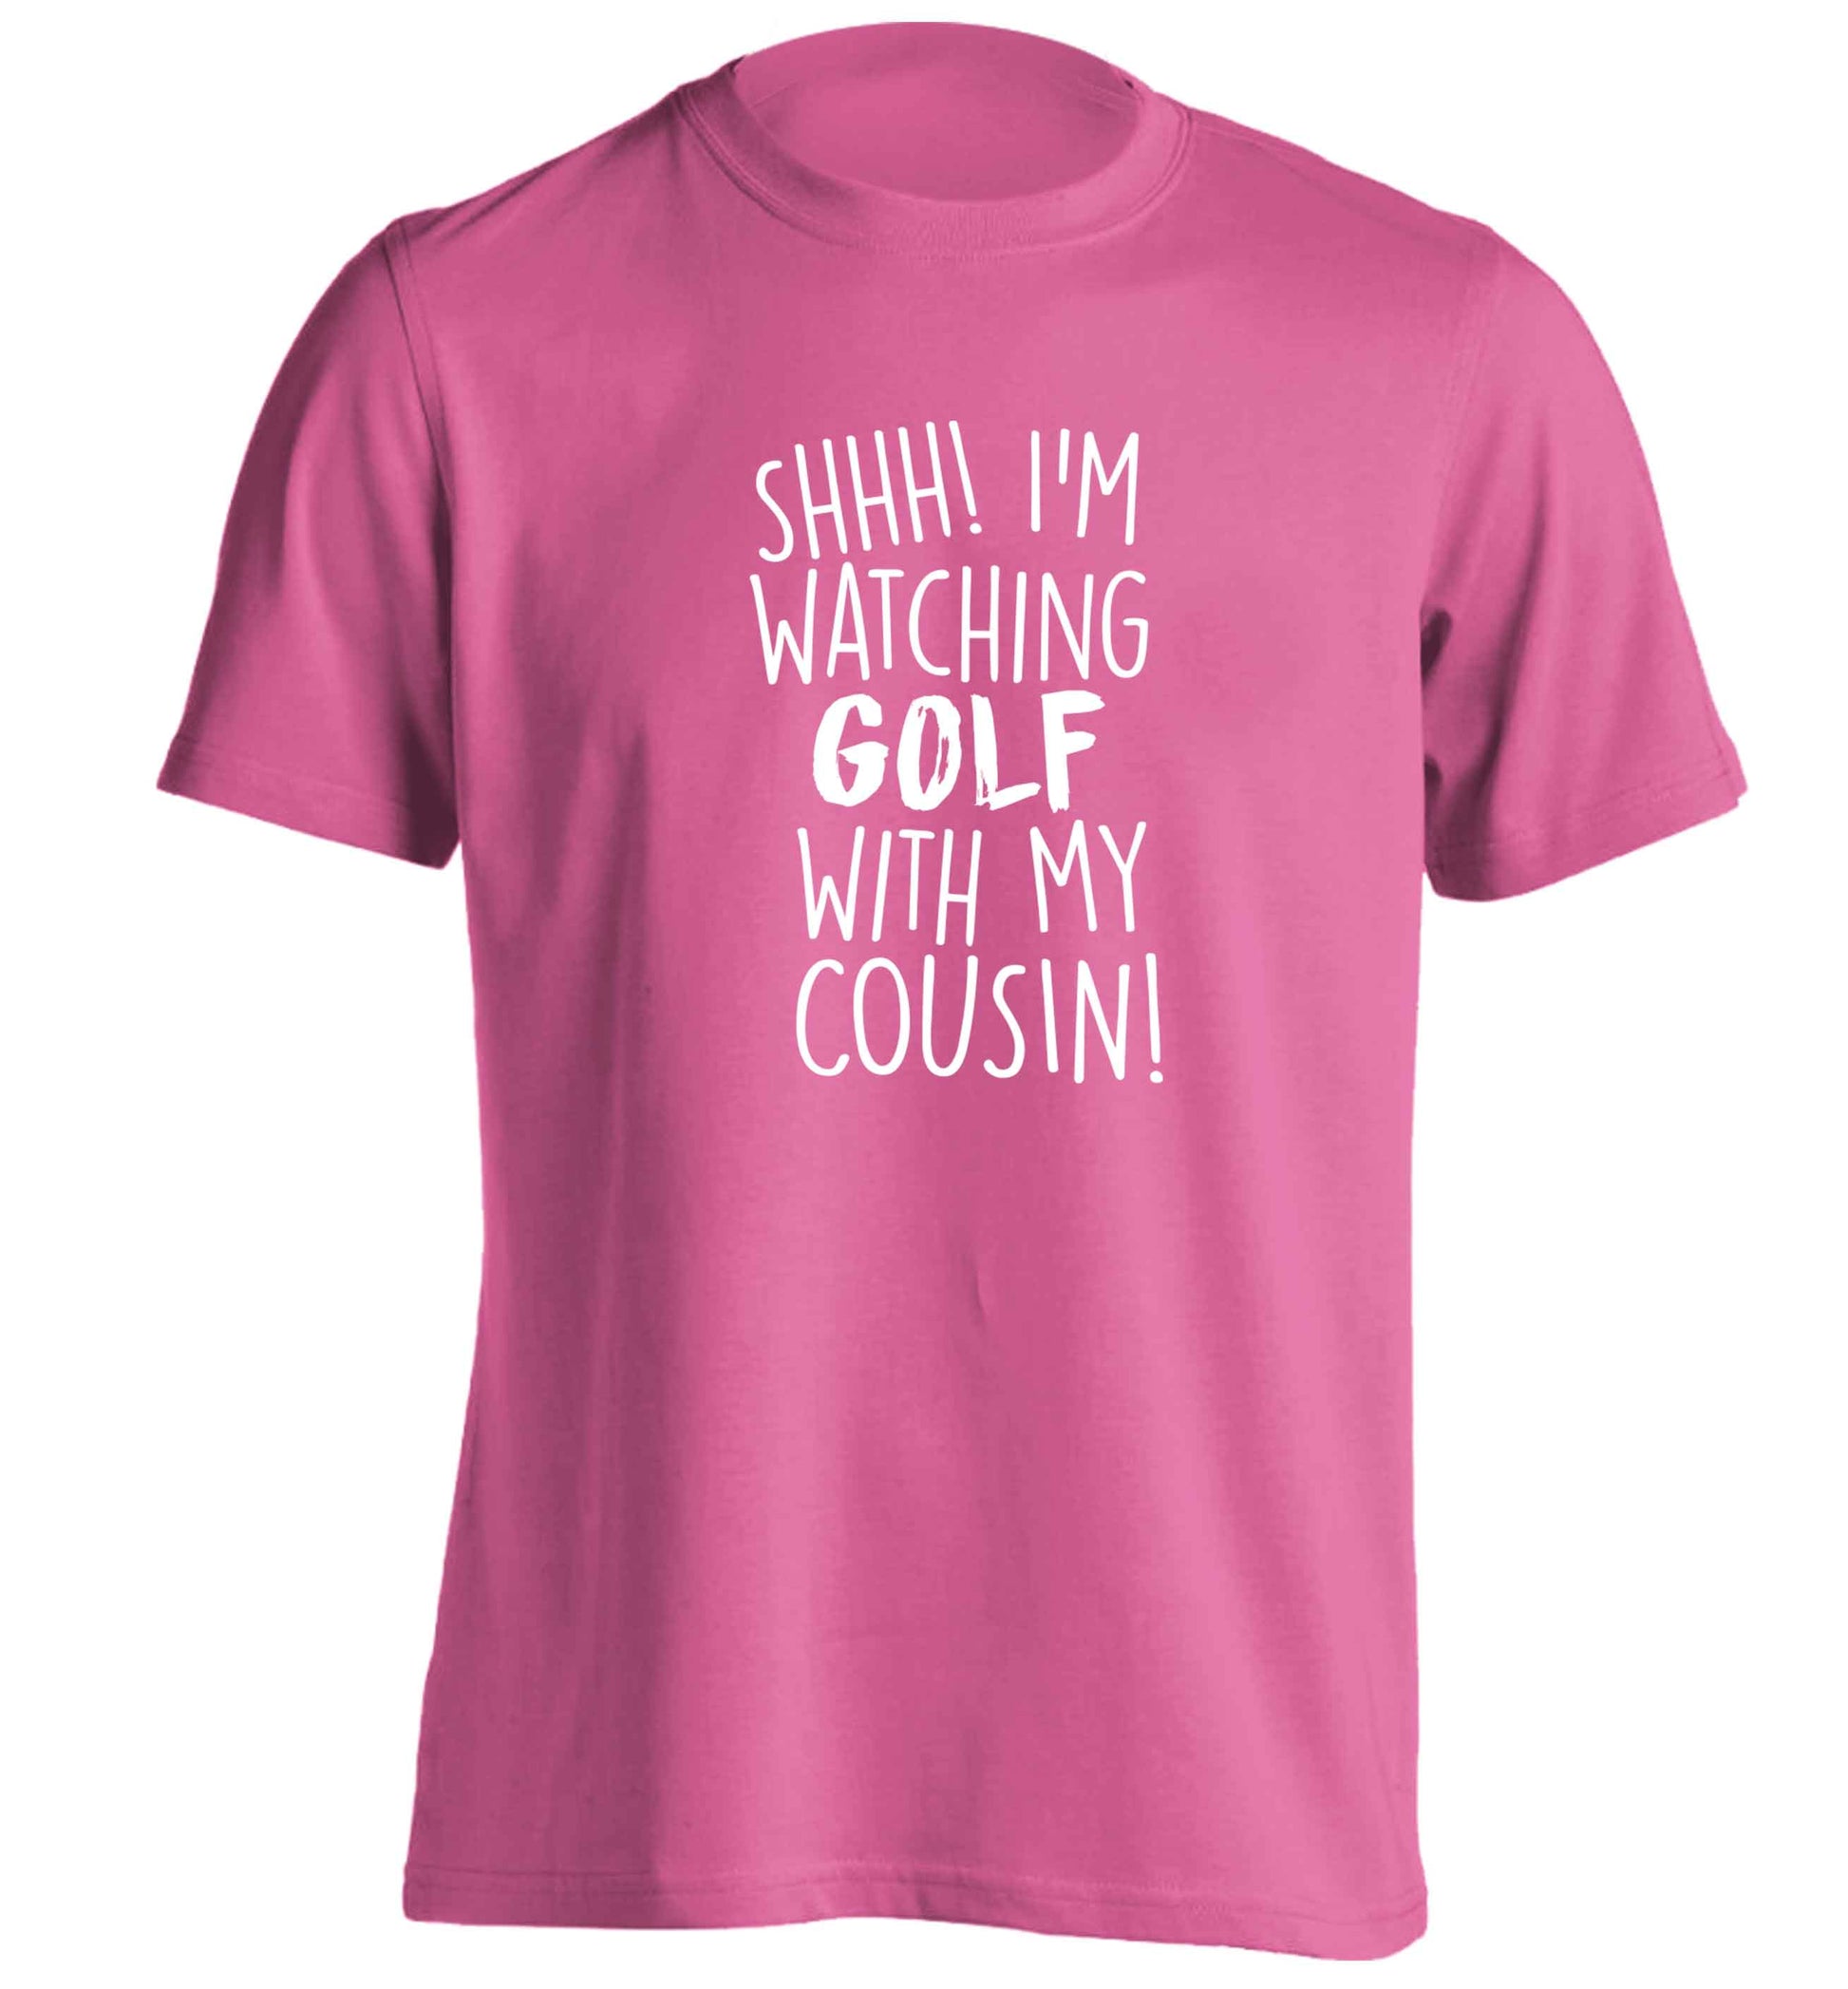 Shh I'm watching golf with my cousin adults unisex pink Tshirt 2XL